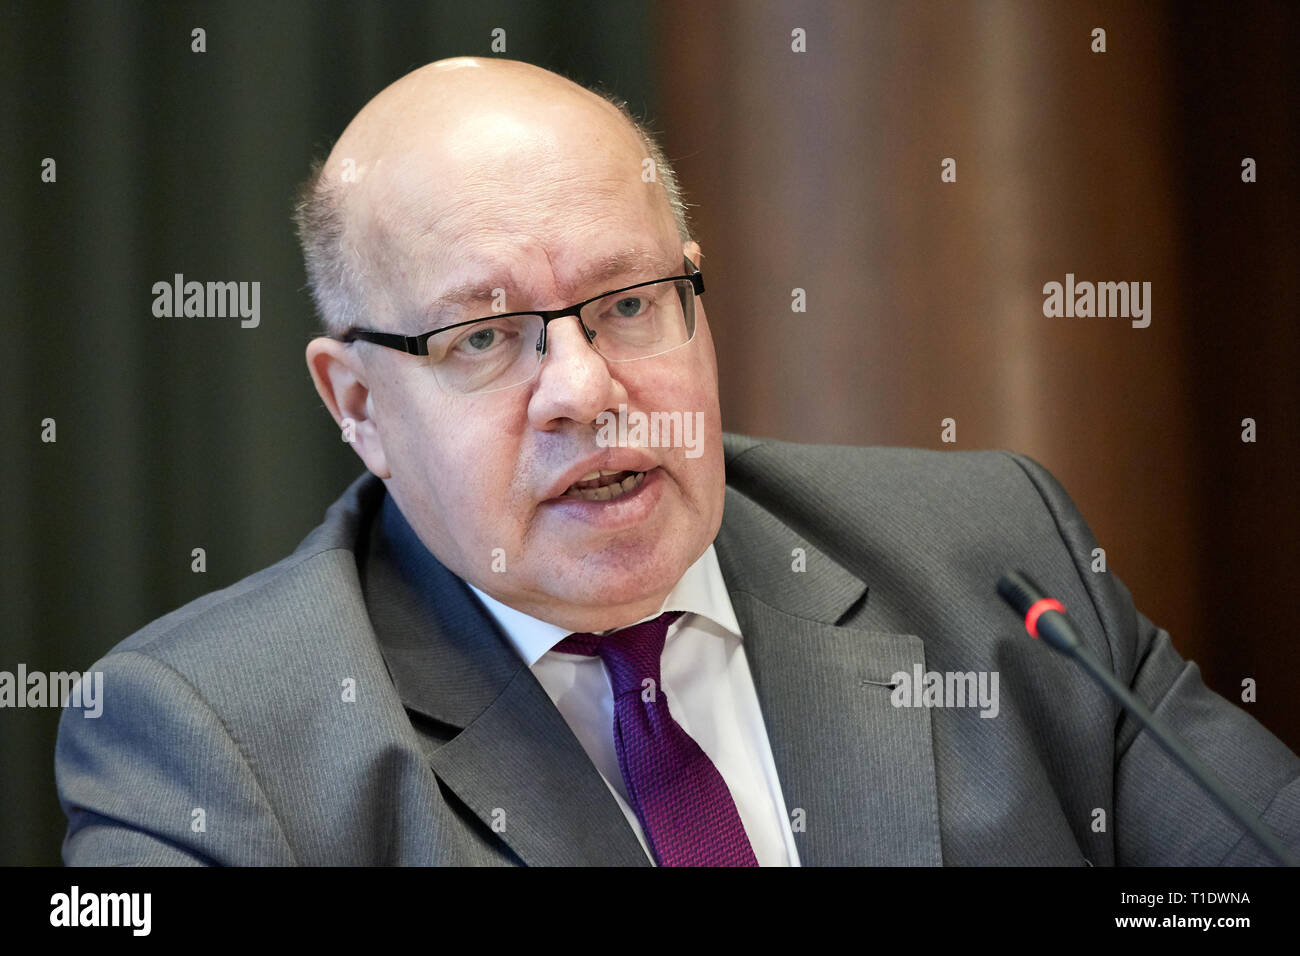 05.02.2019, Berlin, Berlin, Germany - Peter Altmaier, Federal Minister of Economics and Energy, at the presentation of the National Industrial Strateg Stock Photo